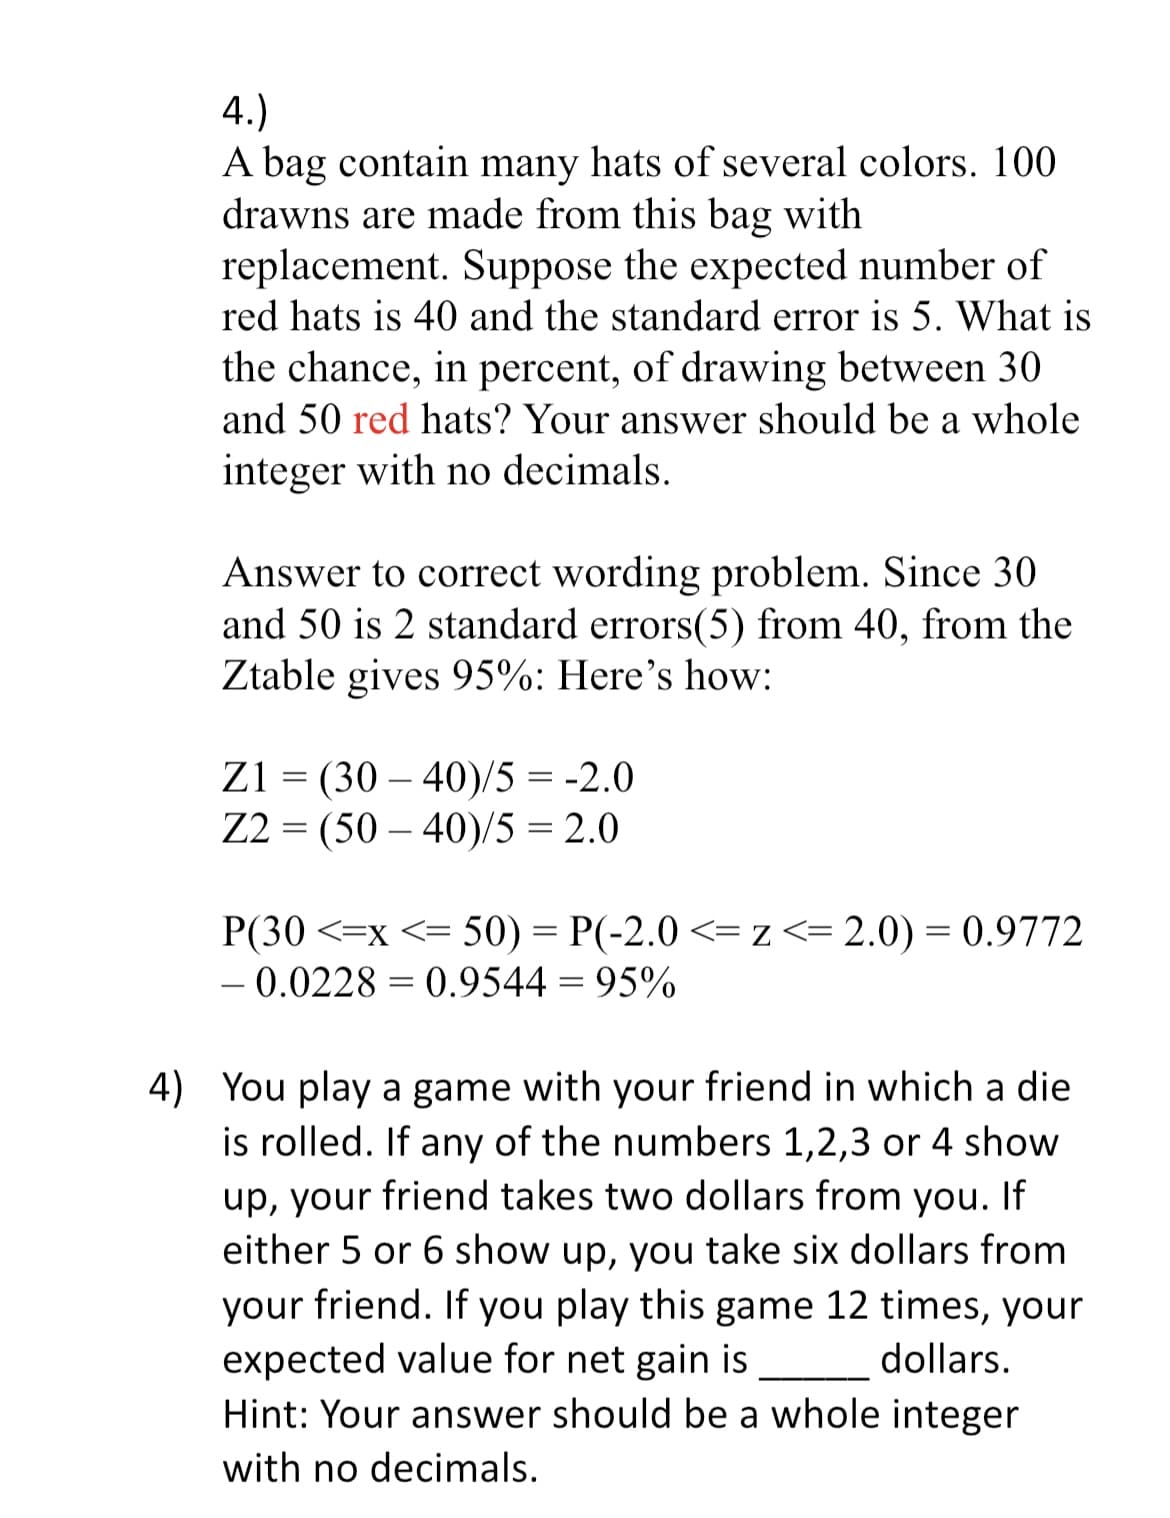 4.)
A bag contain many hats of several colors. 100
drawns are made from this bag with
replacement. Suppose the expected number of
red hats is 40 and the standard error is 5. What is
the chance, in percent, of drawing between 30
and 50 red hats? Your answer should be a whole
integer with no decimals.
Answer to correct wording problem. Since 30
and 50 is 2 standard errors(5) from 40, from the
Ztable gives 95%: Here's how:
Z1 = (30-40)/5 = -2.0
Z2 (50-40)/5 = 2.0
=
P(30 < x <= 50) = P(-2.0 <= z <= 2.0) = 0.9772
-0.0228 = 0.9544 = 95%
4) You play a game with your friend in which a die
is rolled. If any of the numbers 1,2,3 or 4 show
up, your friend takes two dollars from you. If
either 5 or 6 show up, you take six dollars from
your friend. If you play this game 12 times, your
expected value for net gain is
dollars.
Hint: Your answer should be a whole integer
with no decimals.